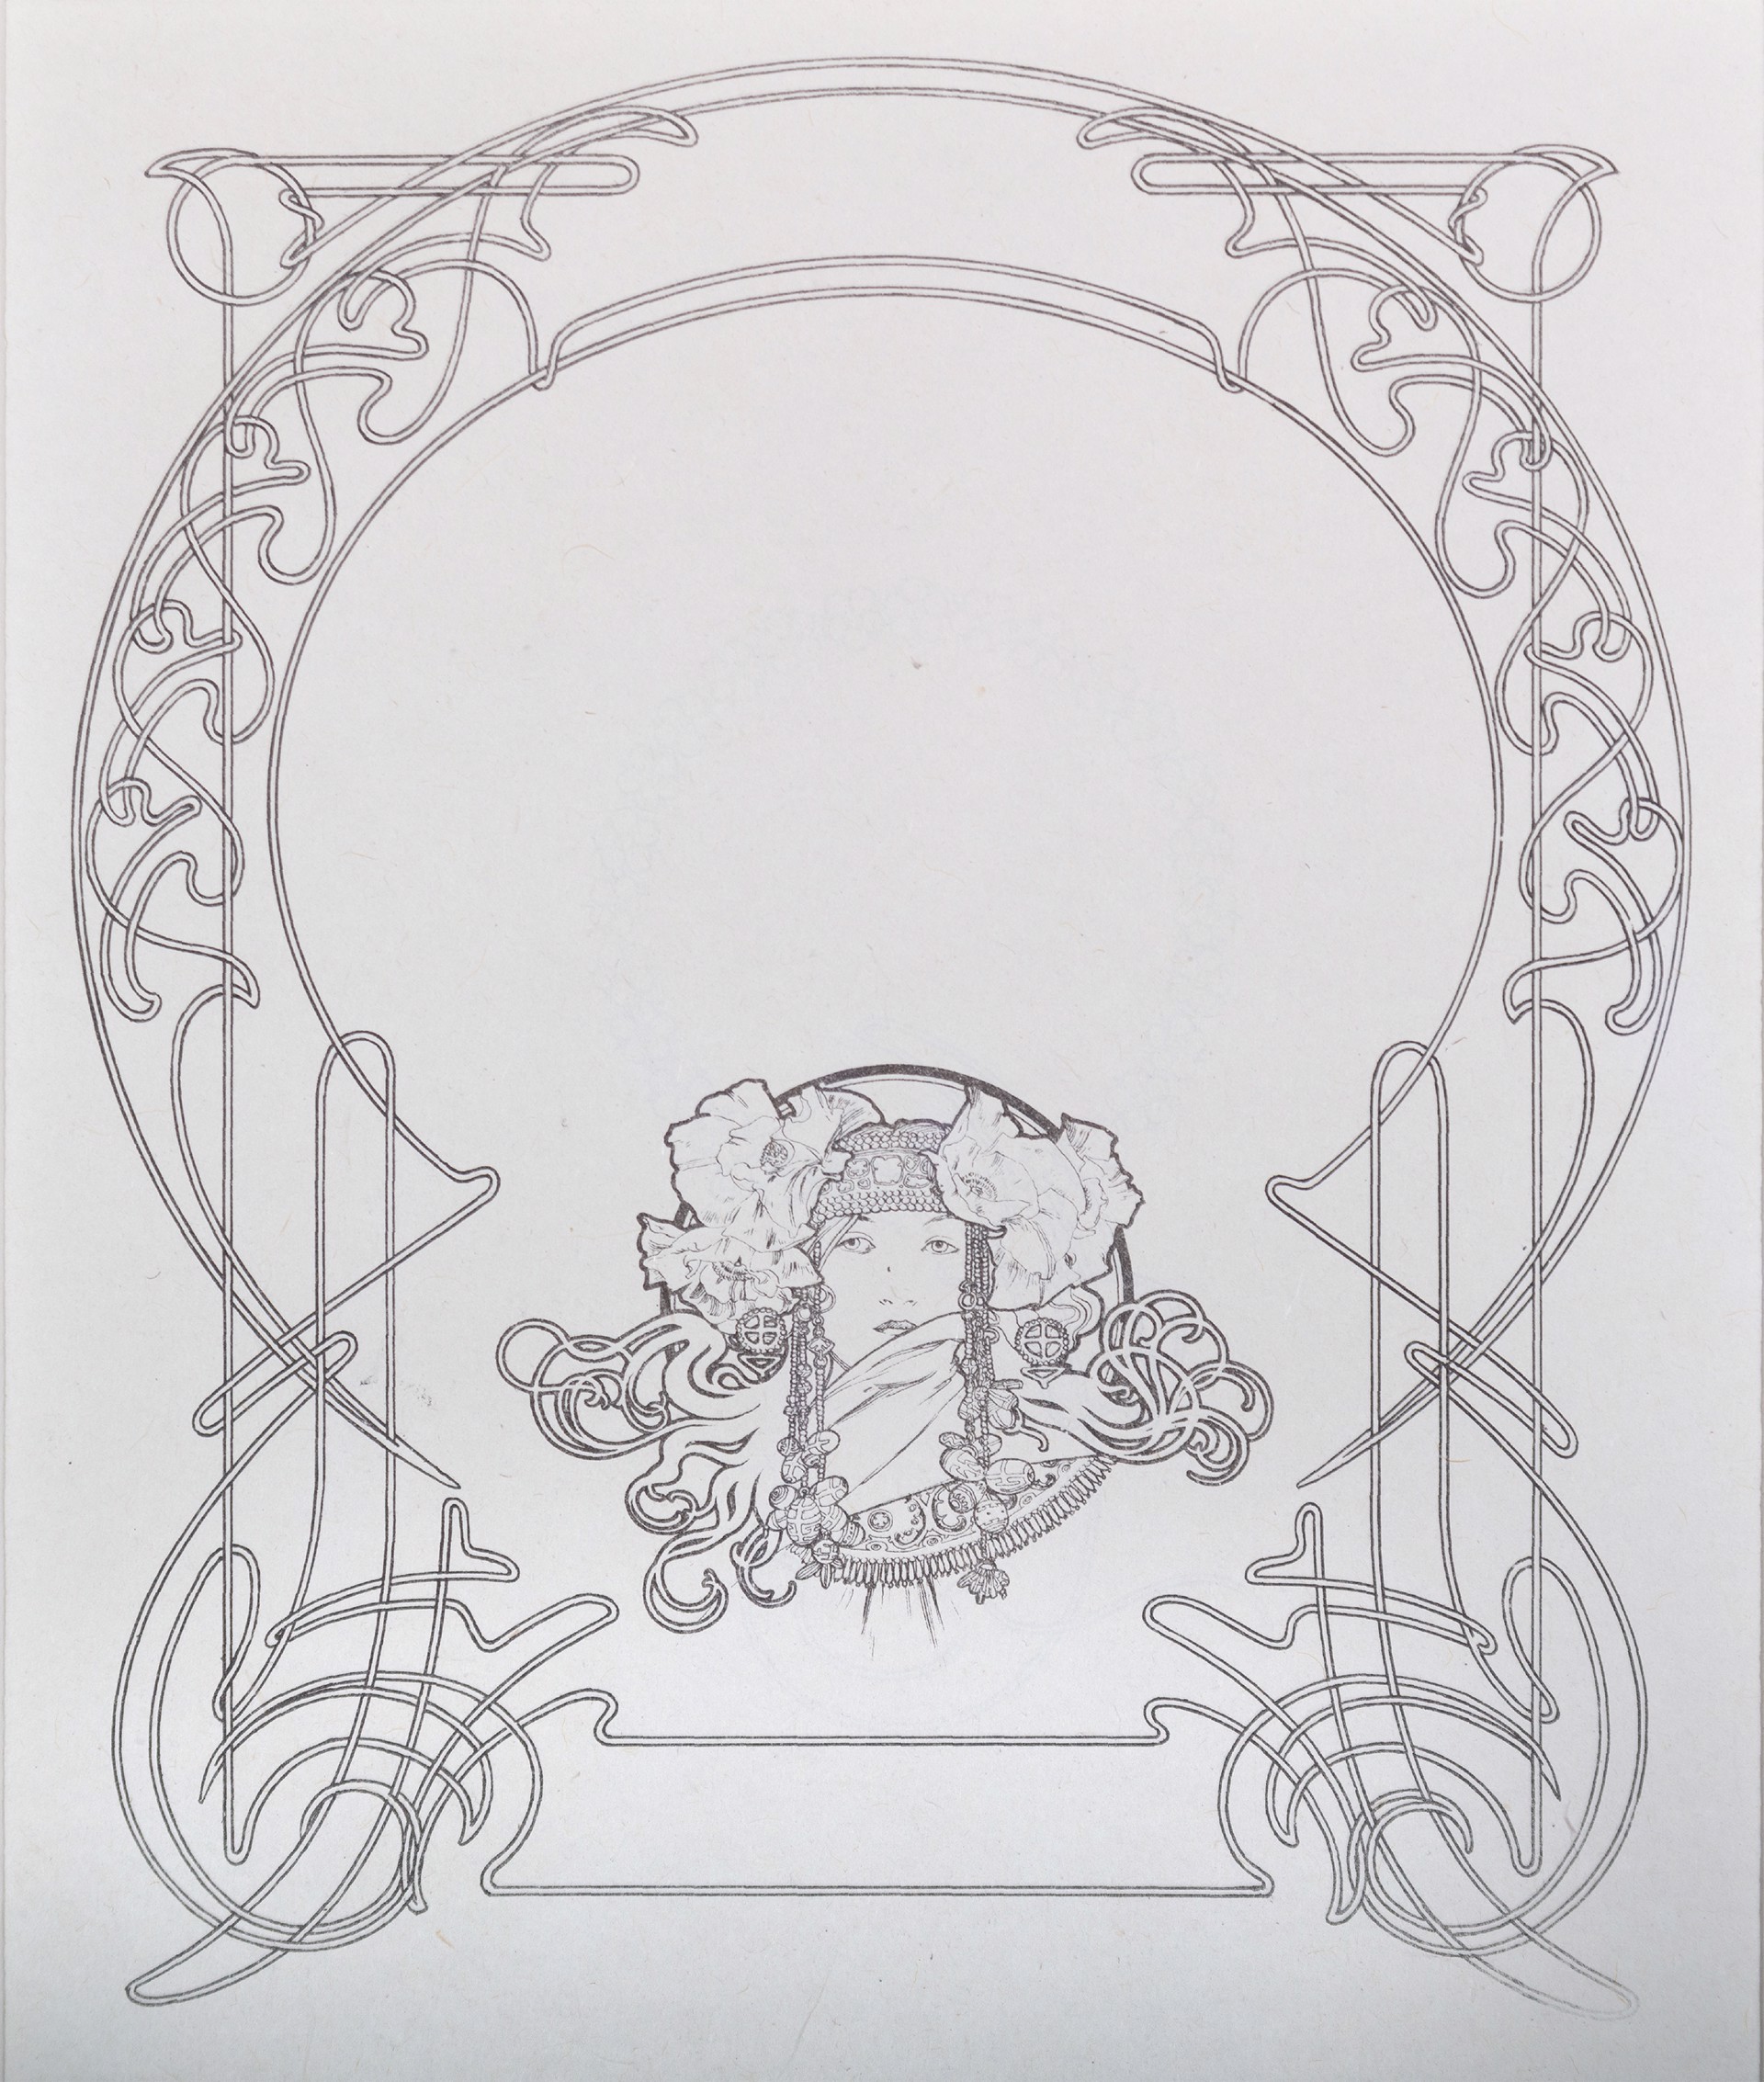 From: Ilsee, Princess of Tripoli Recto: "Title Page" Verso: "Art Nouveau Motif" by Alphonse Mucha